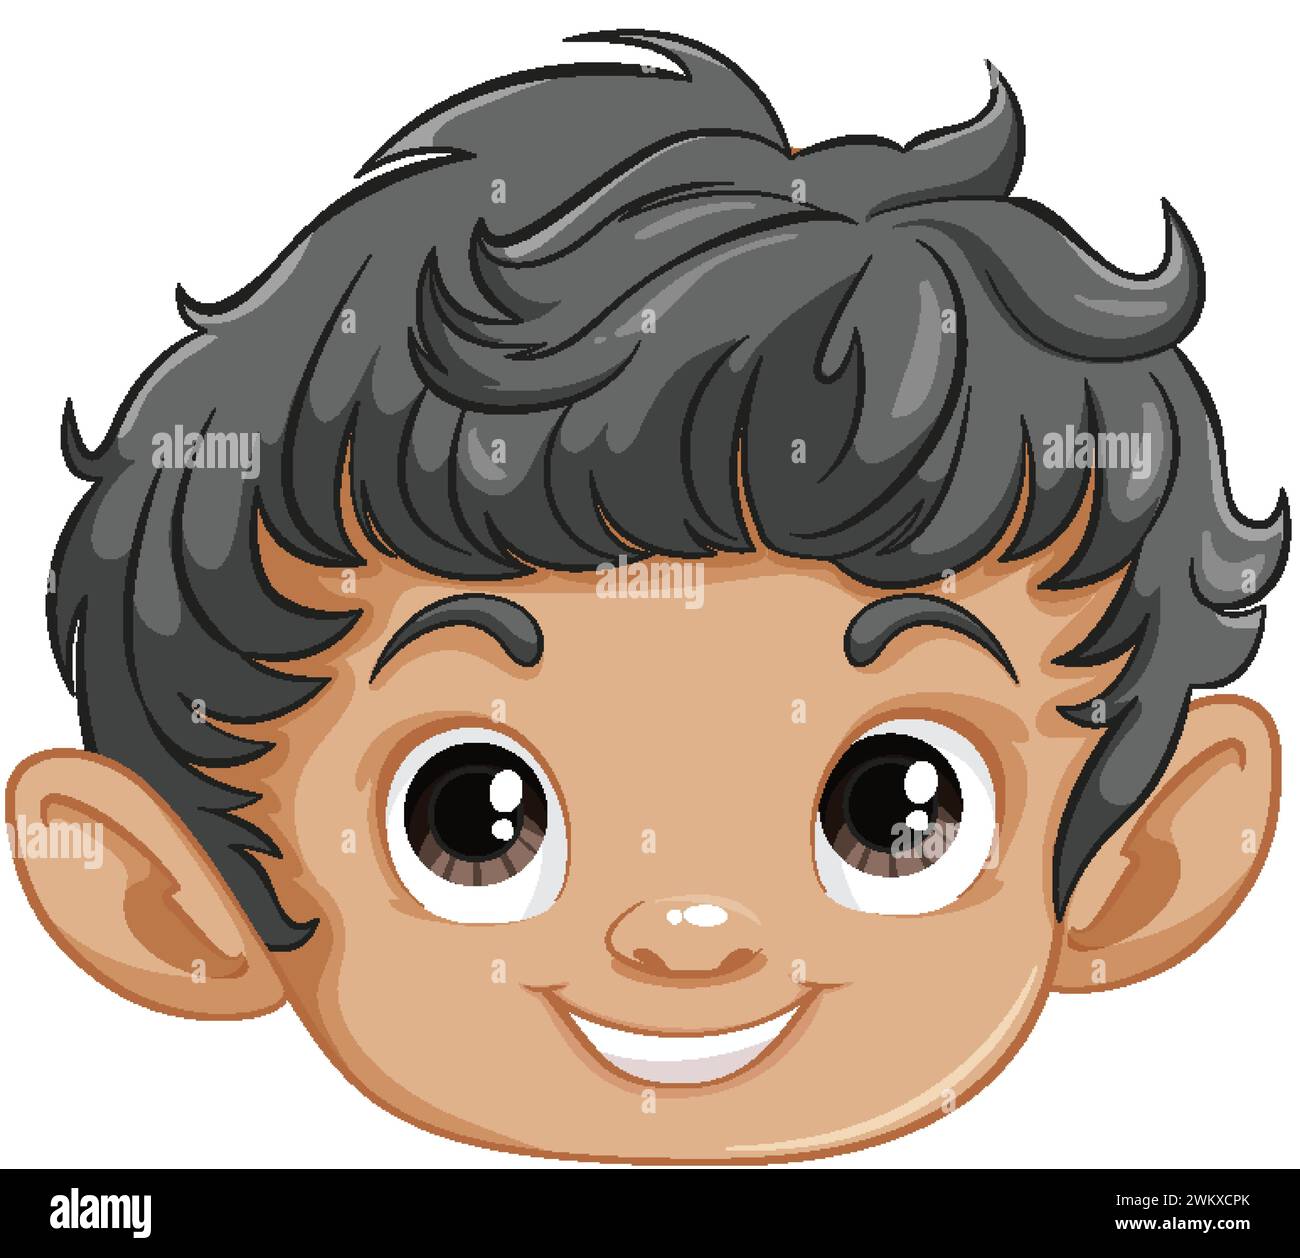 Vector illustration of a smiling young boy. Stock Vector